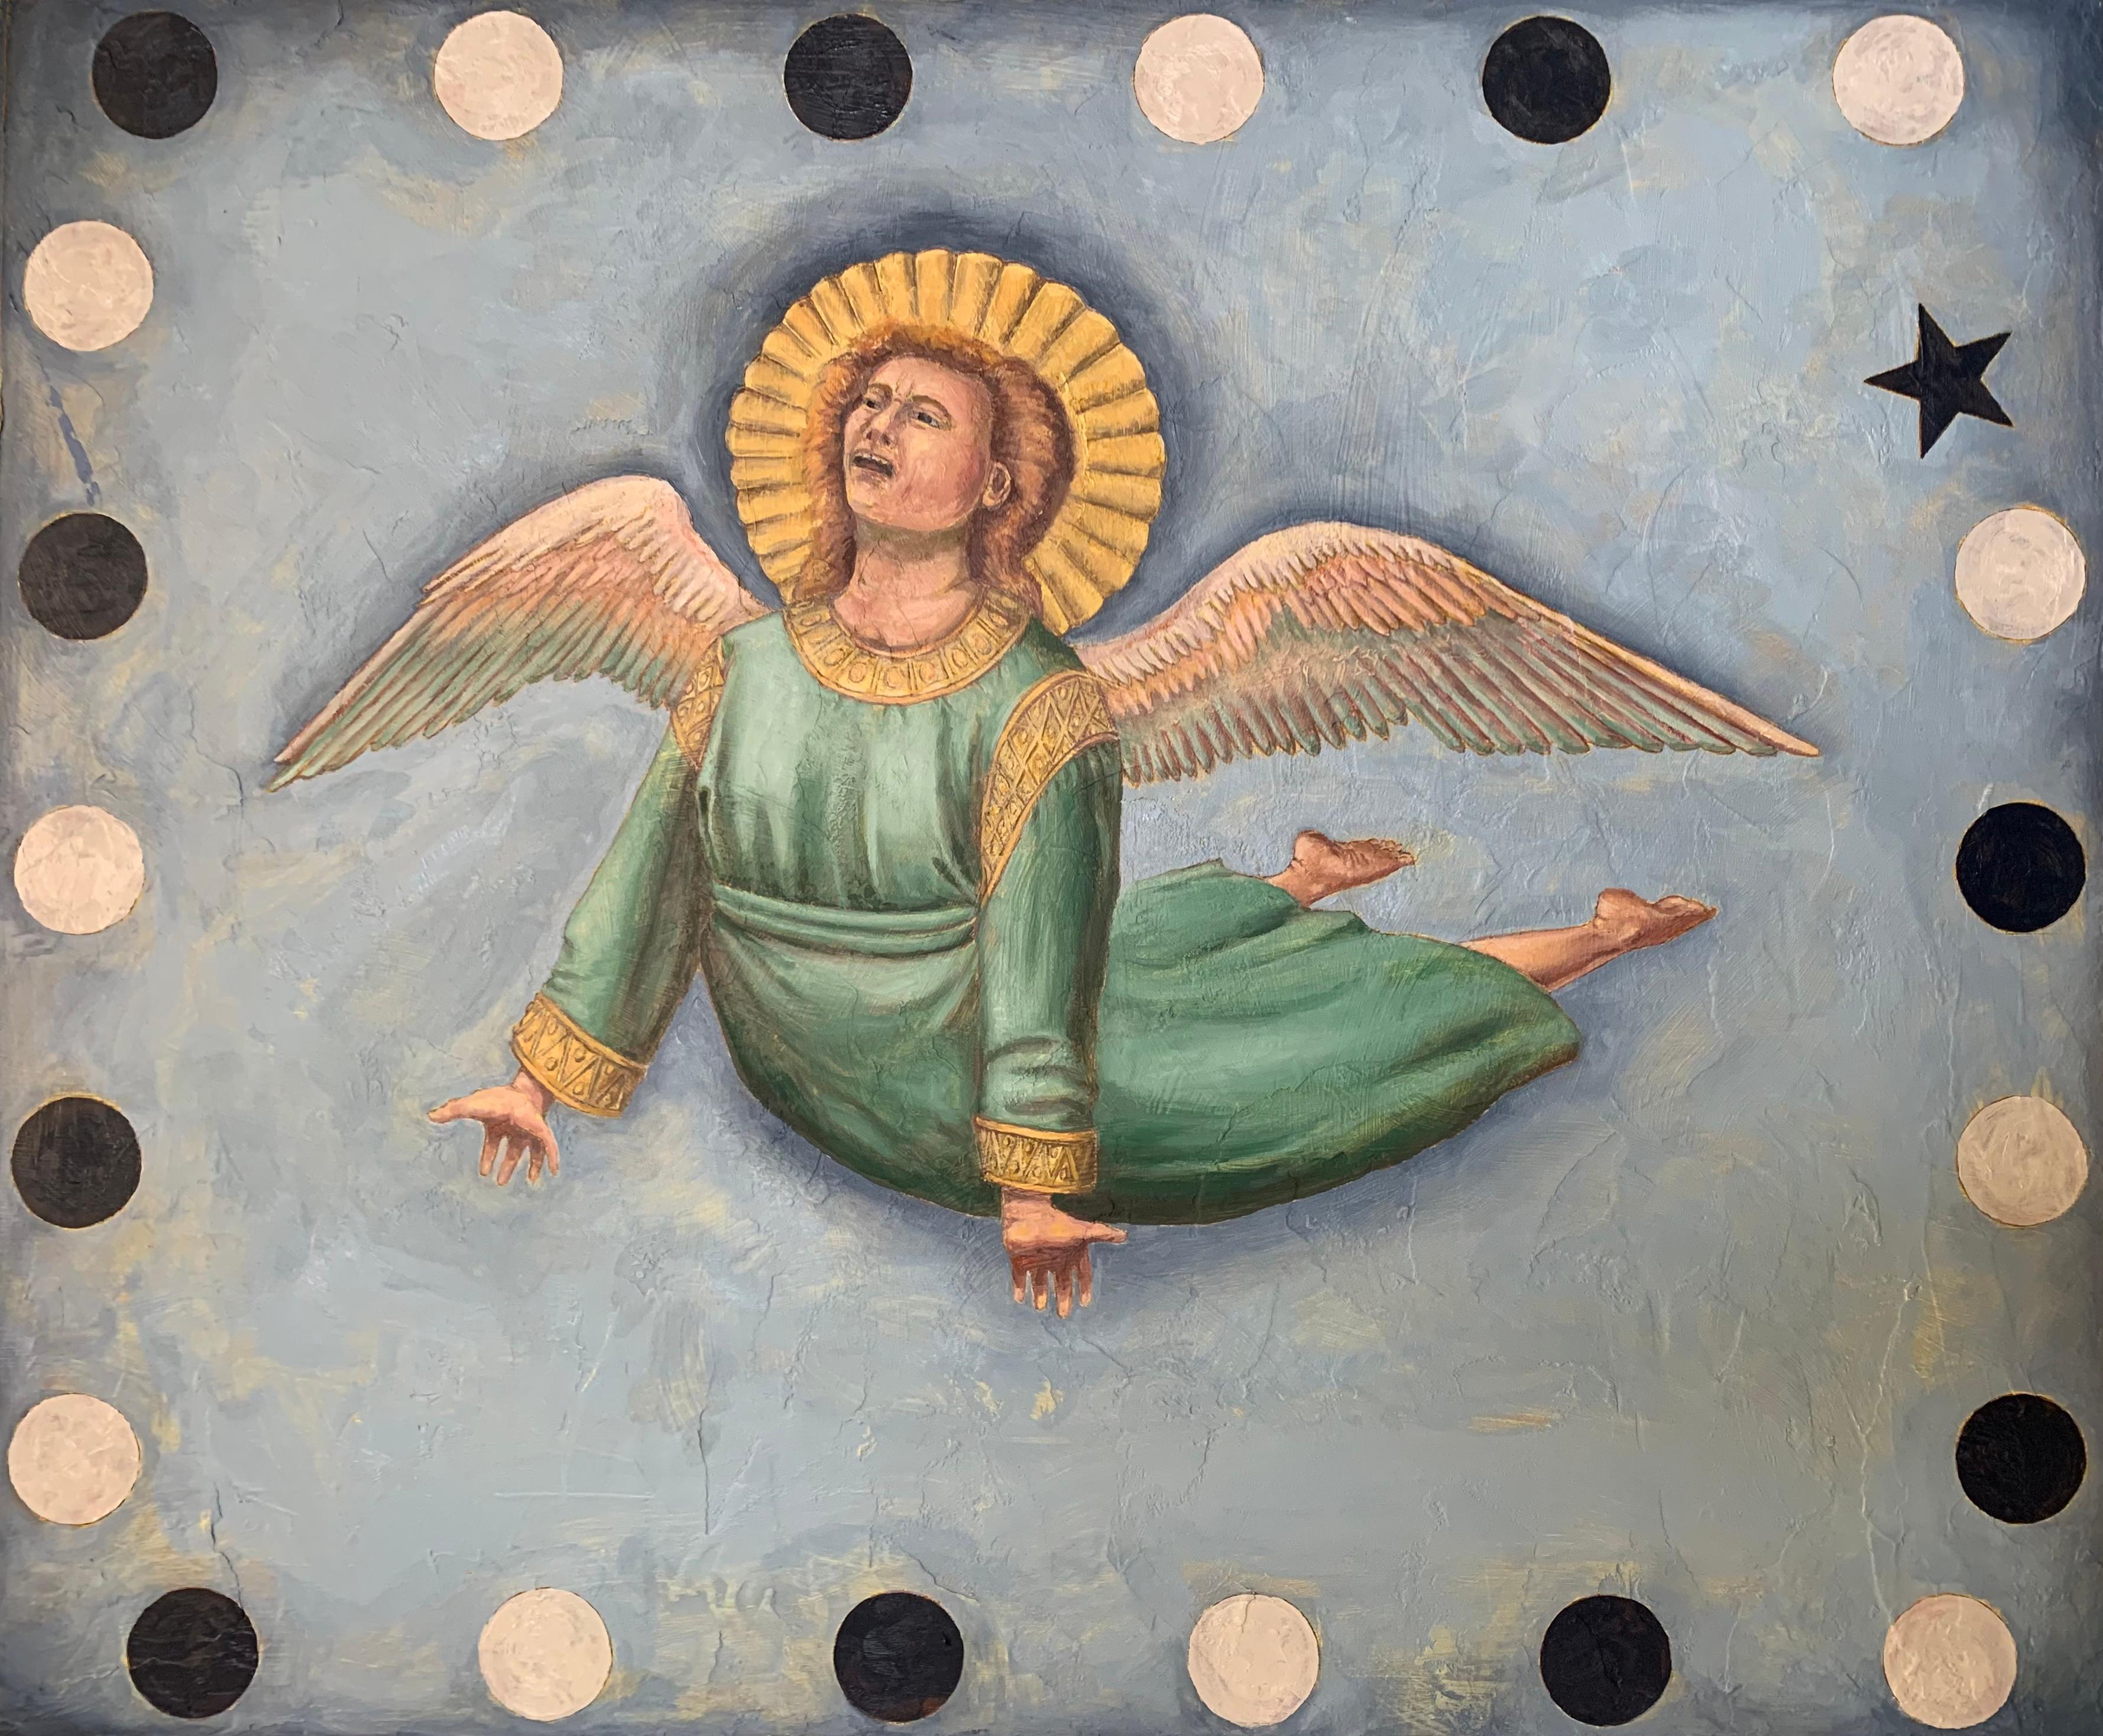 Tony Geiger Figurative Painting - "GIOTTO ANGEL WITH CIRCLE AND STAR", oil on wood, renaissance gothic, surreal